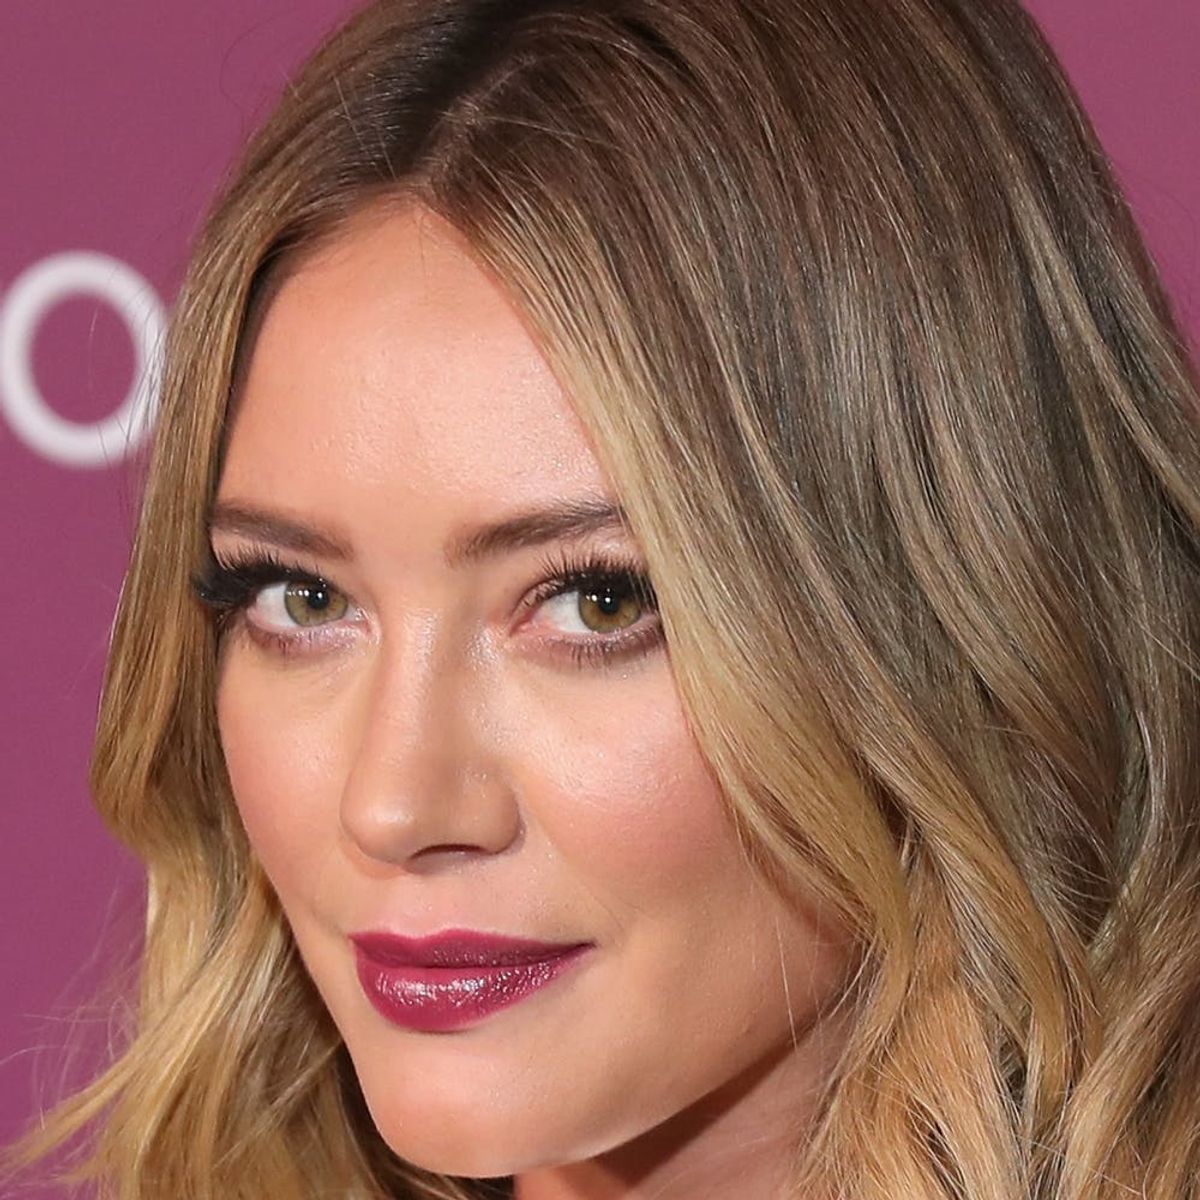 Hilary Duff Just Paid Homage to Lizzie McGuire in the Chicest Way Possible